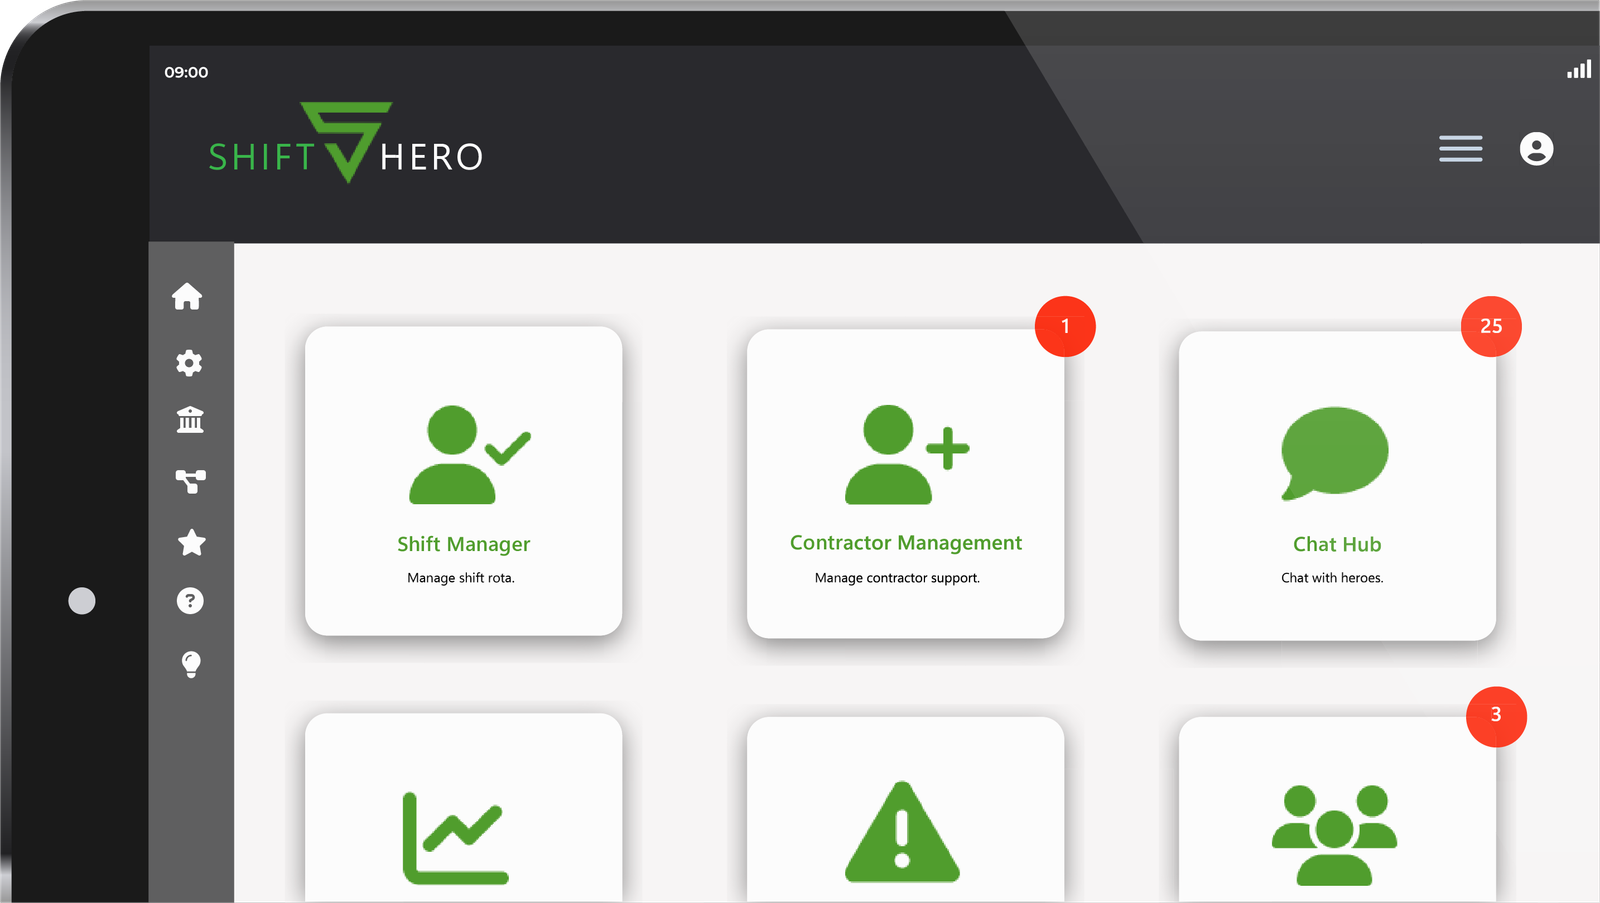 shift hero tablet view of the main shift cover application dashboard.